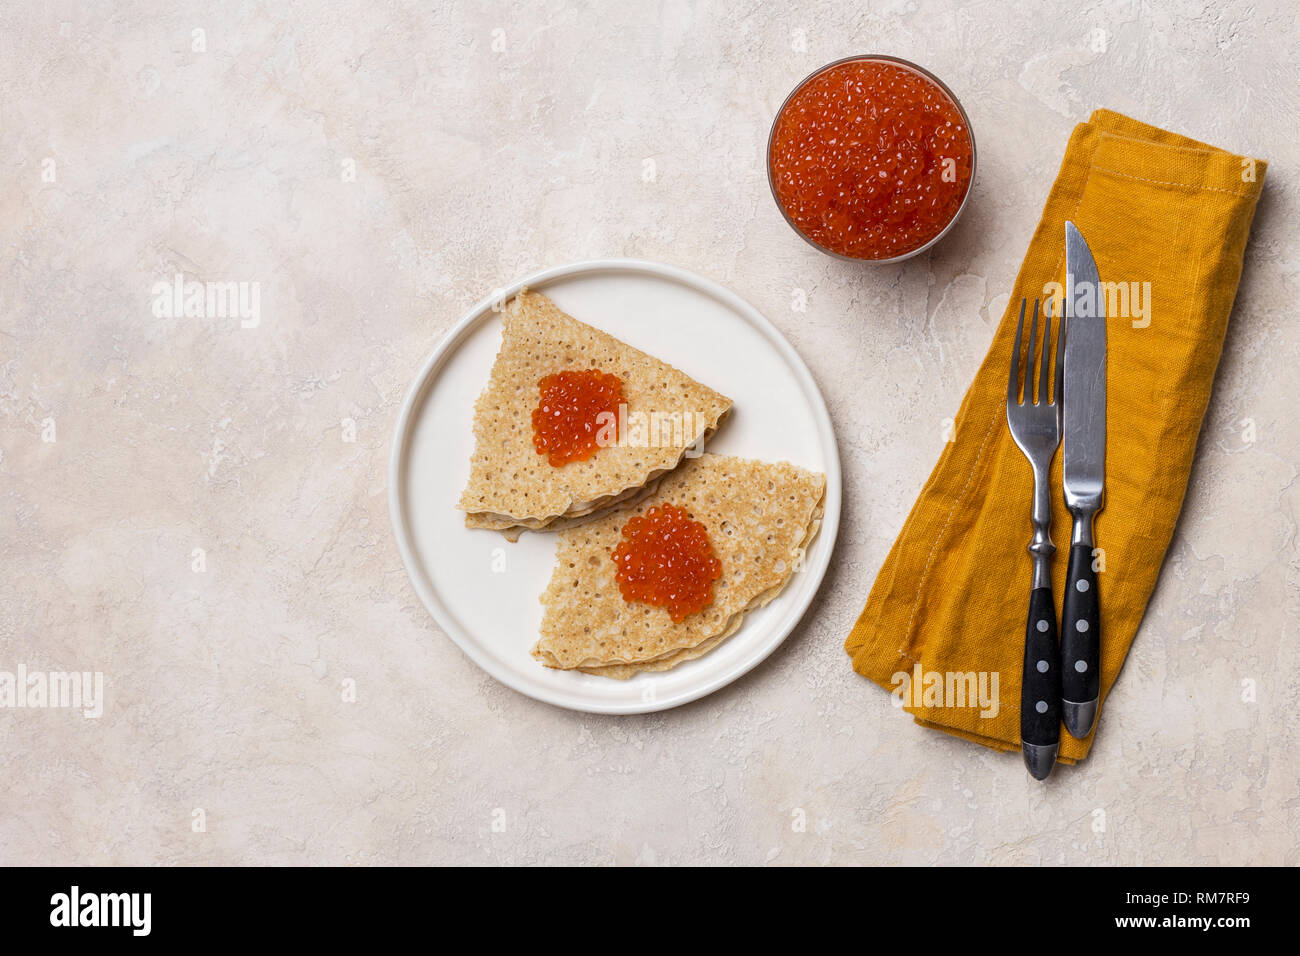 Festive pancakes with red caviar on white plate with fork, knife and napkin, jar of caviar, on white background. Concept of festive food. View from ab Stock Photo